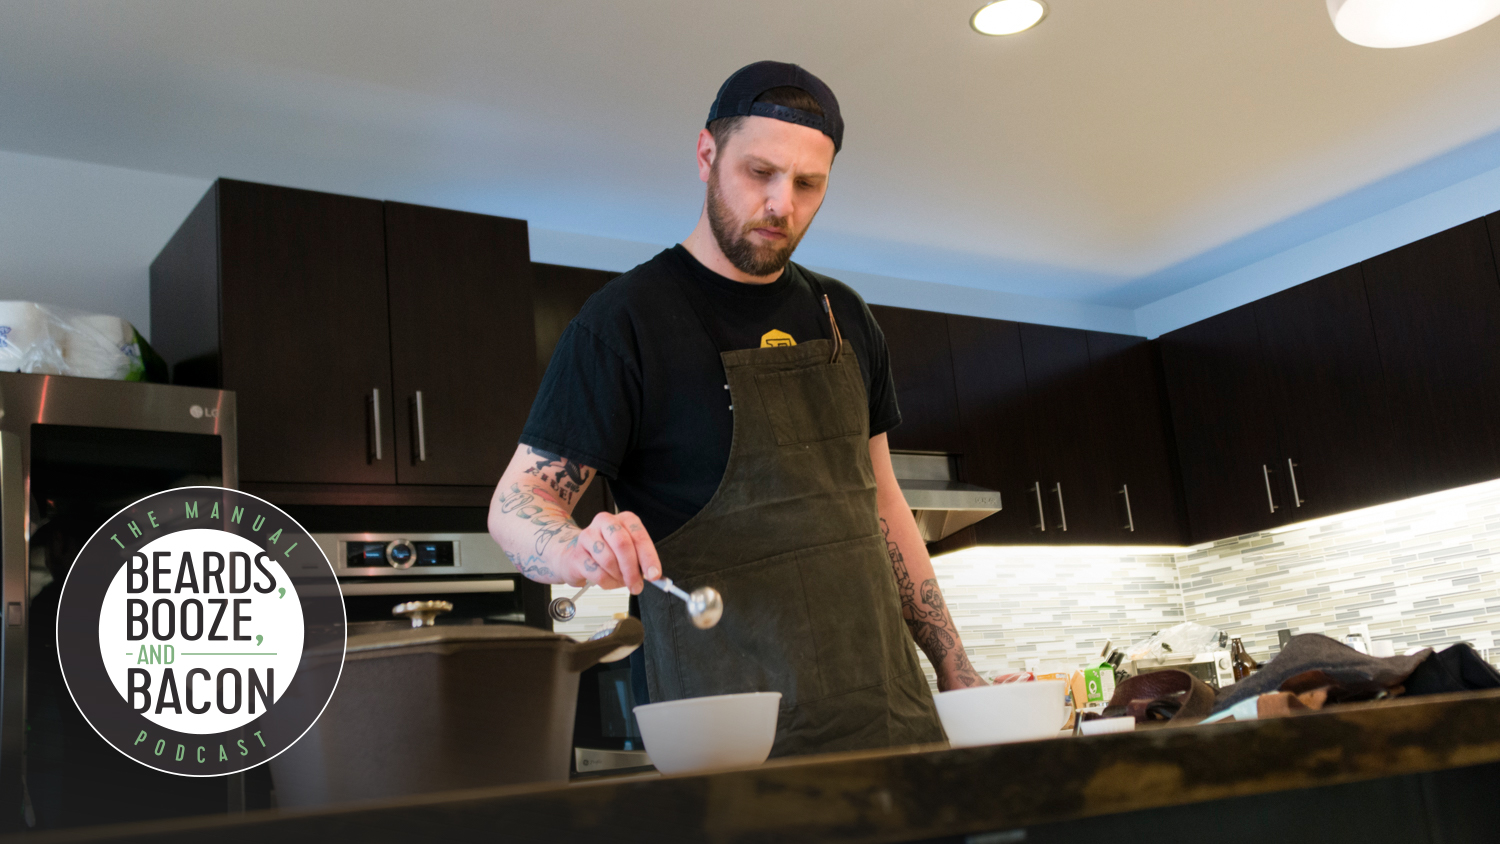 manual podcast beards booze bacon cooking with cannabis and chef brandon parsons the